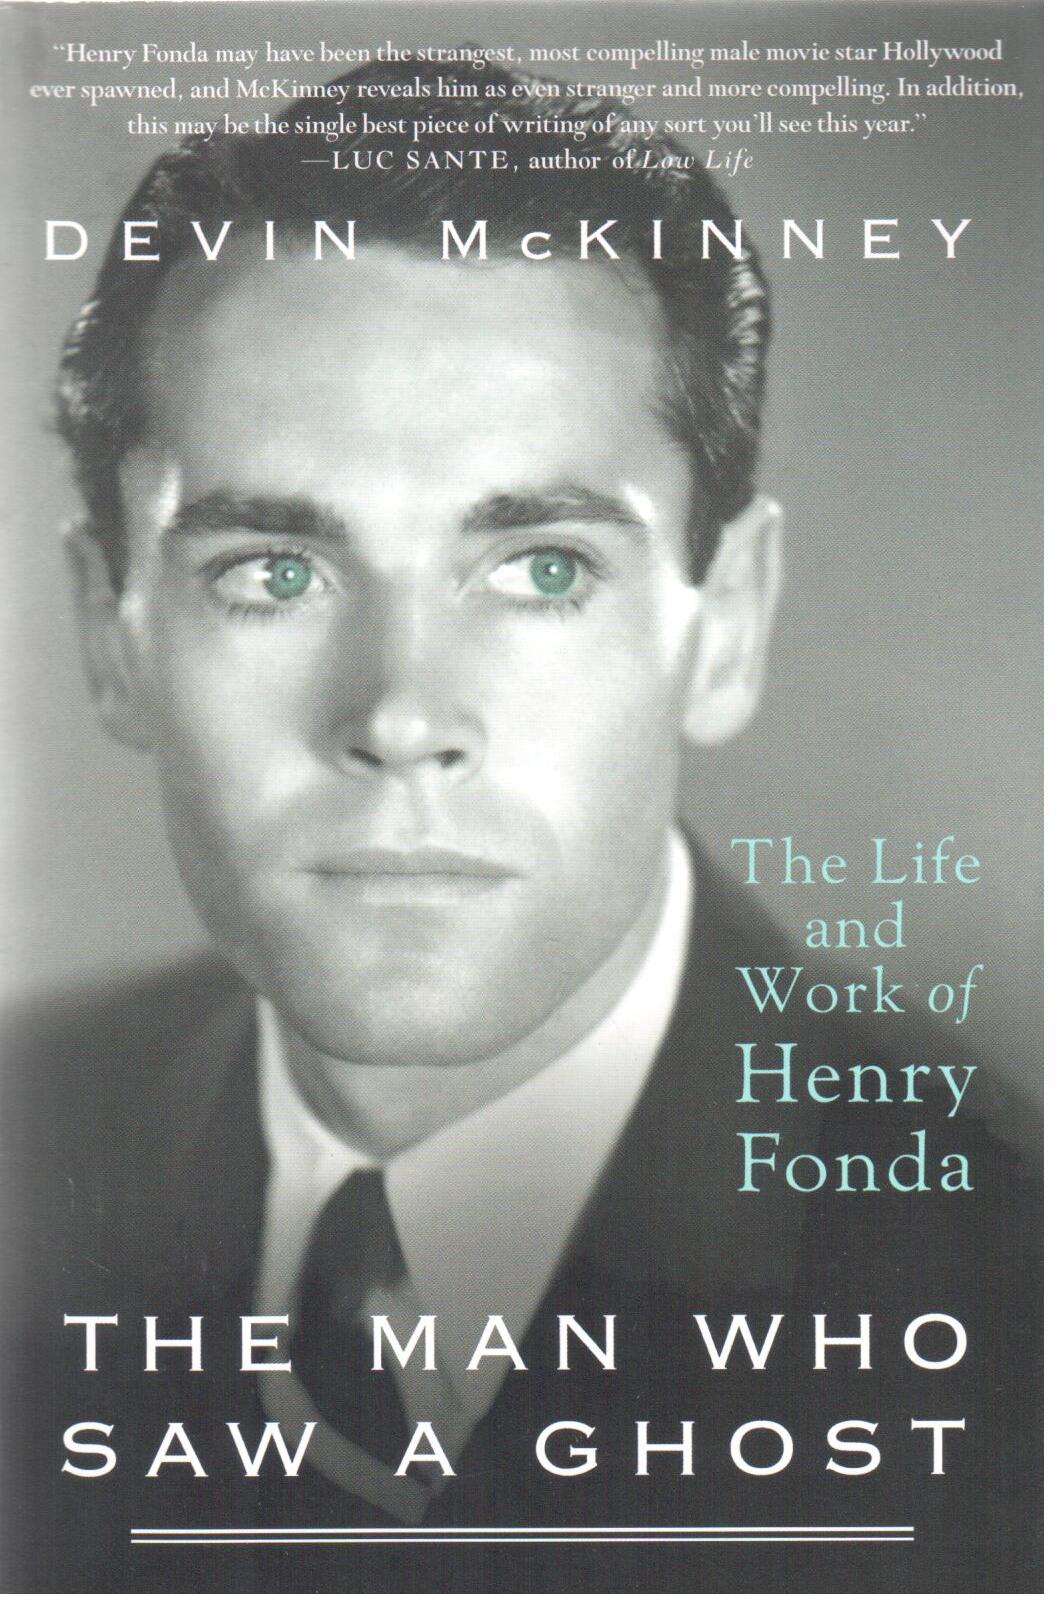 The man who saw a ghost : the life and work of Henry Fonda